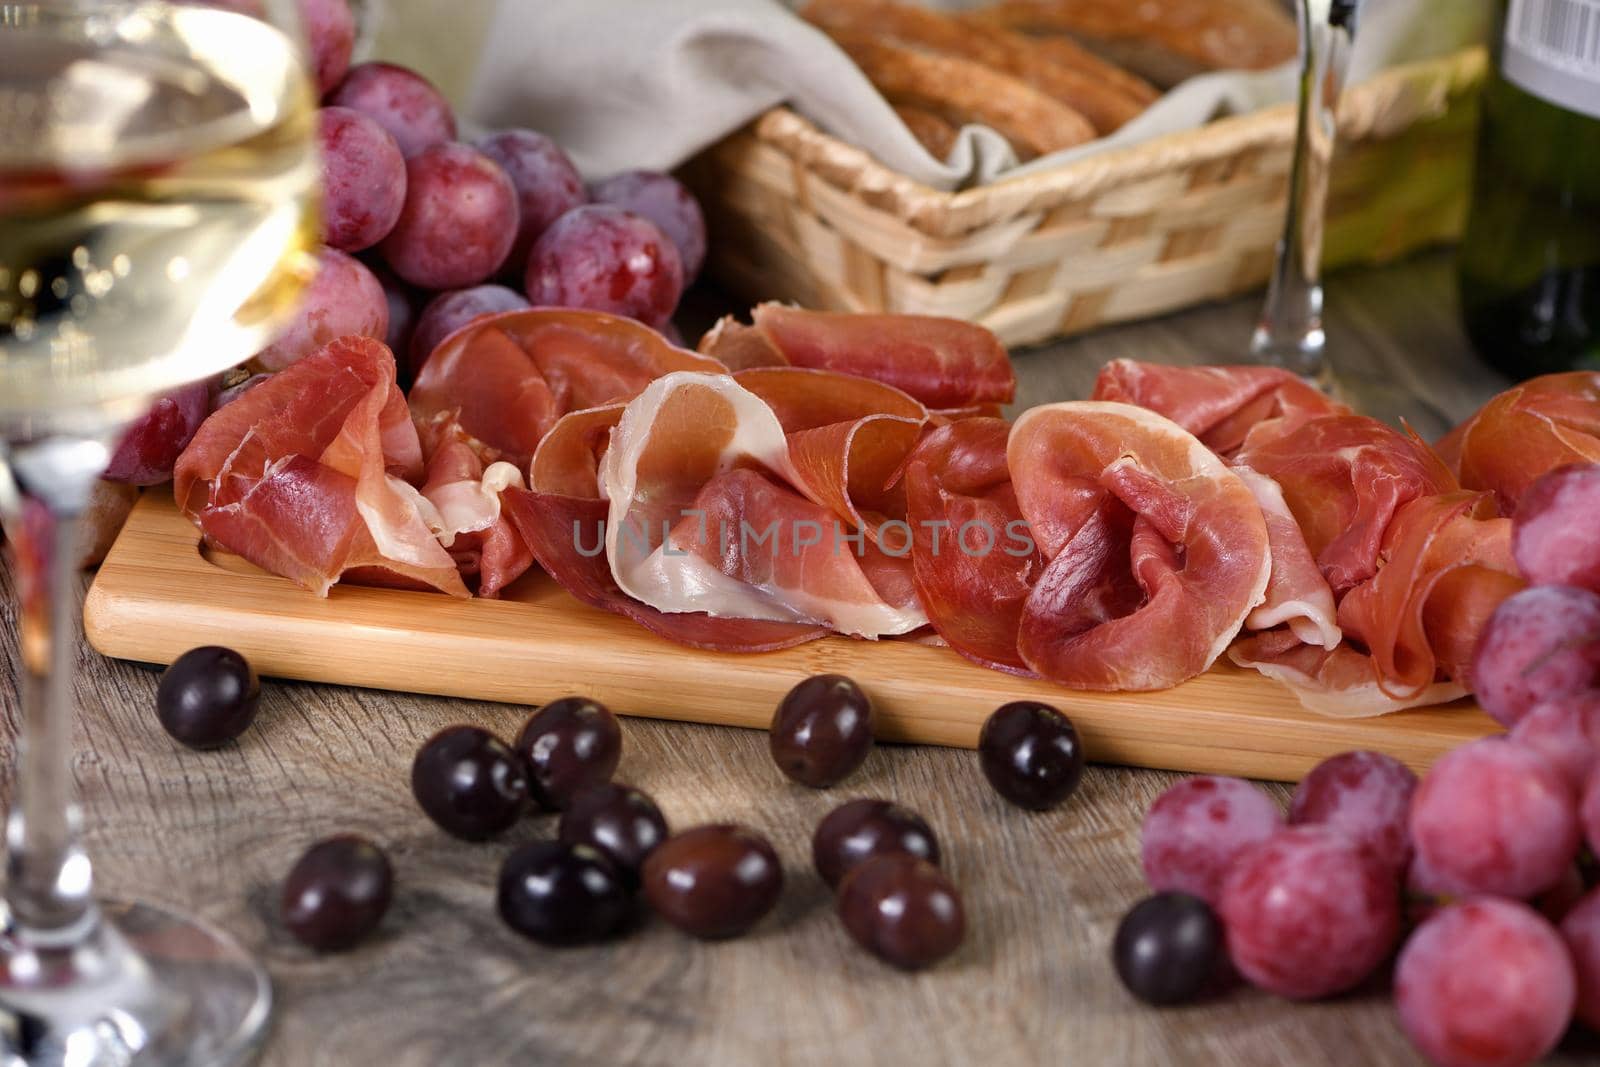   Appetizer sun-dried ham - jamon by Apolonia